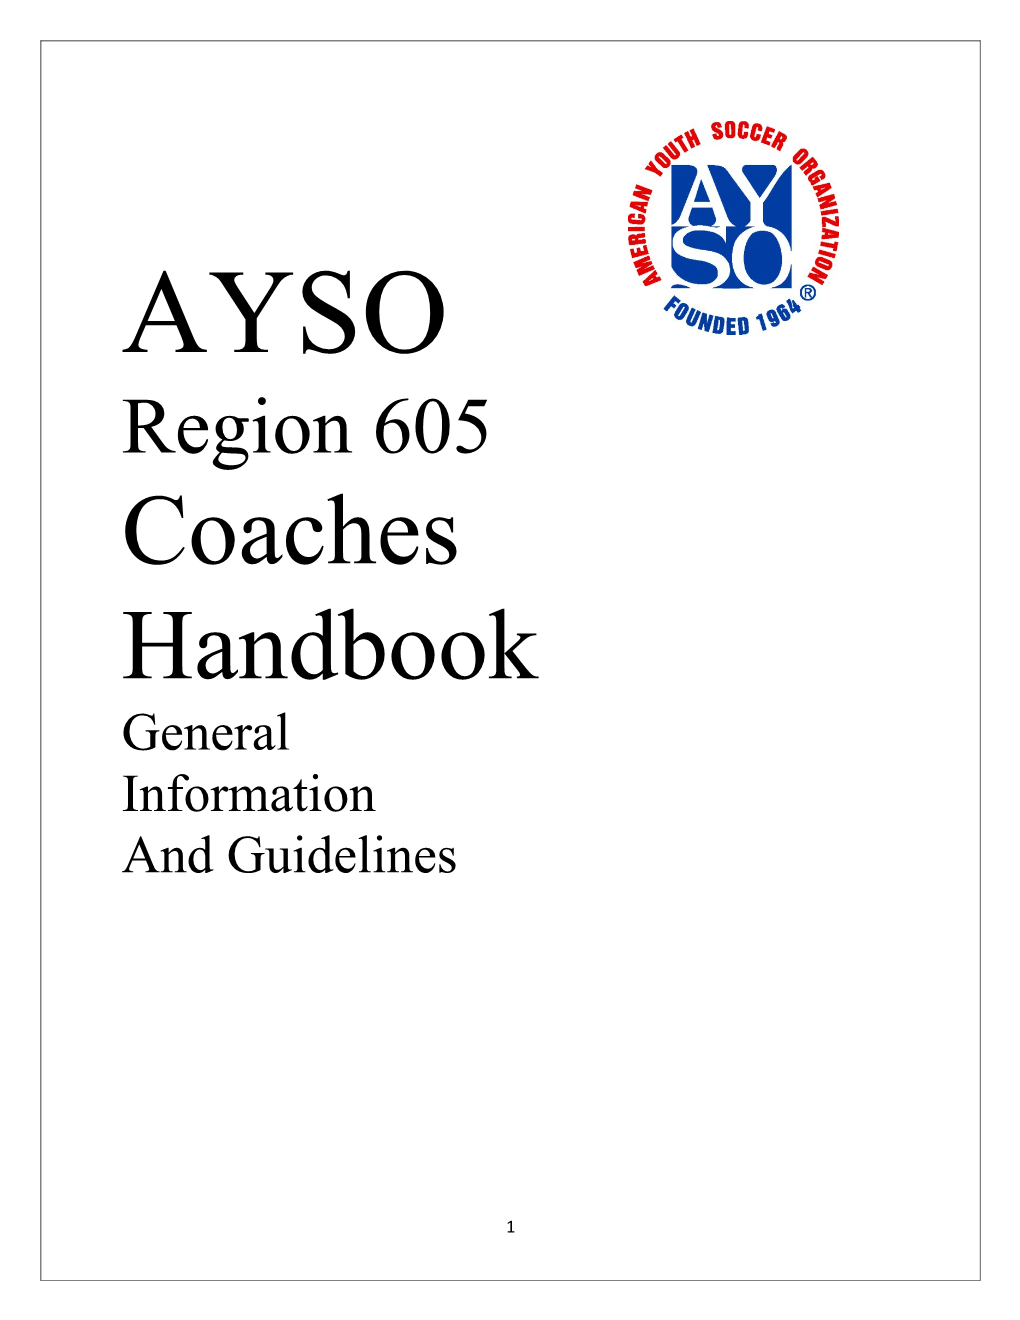 AYSO VISION STATEMENT: to Provide World Class Soccer Programs That Enrich Childrens Lives